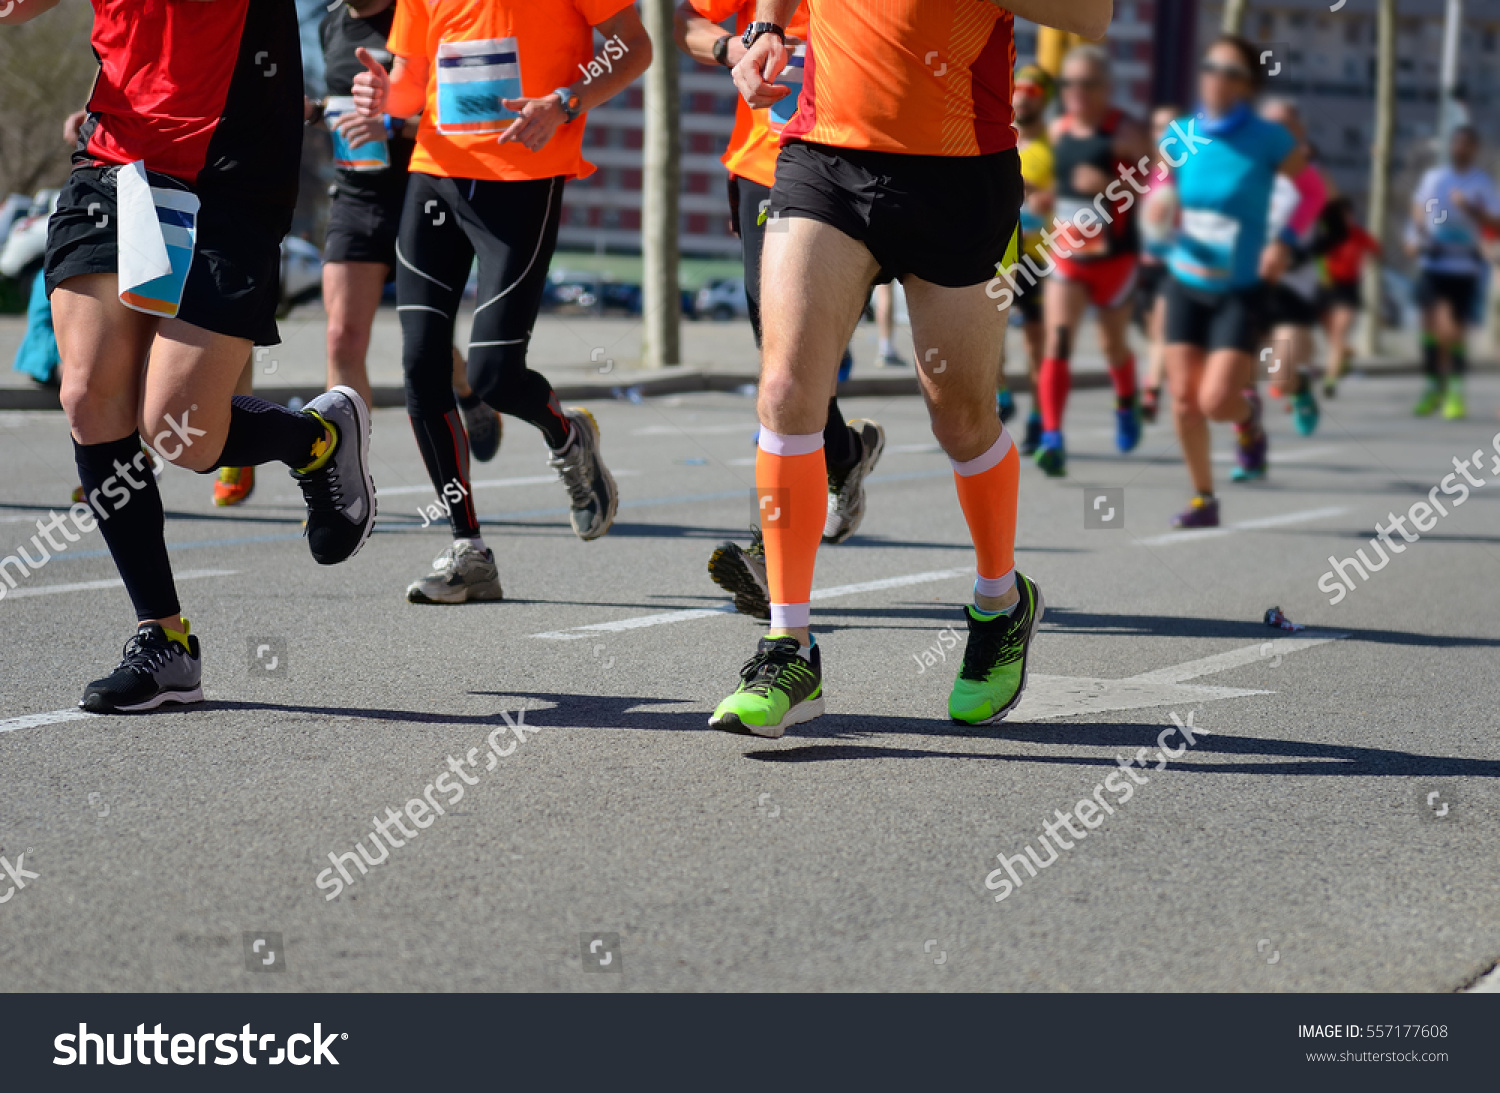 Marathon running race, runners feet on road, sport, fitness and healthy lifestyle concept
 #557177608